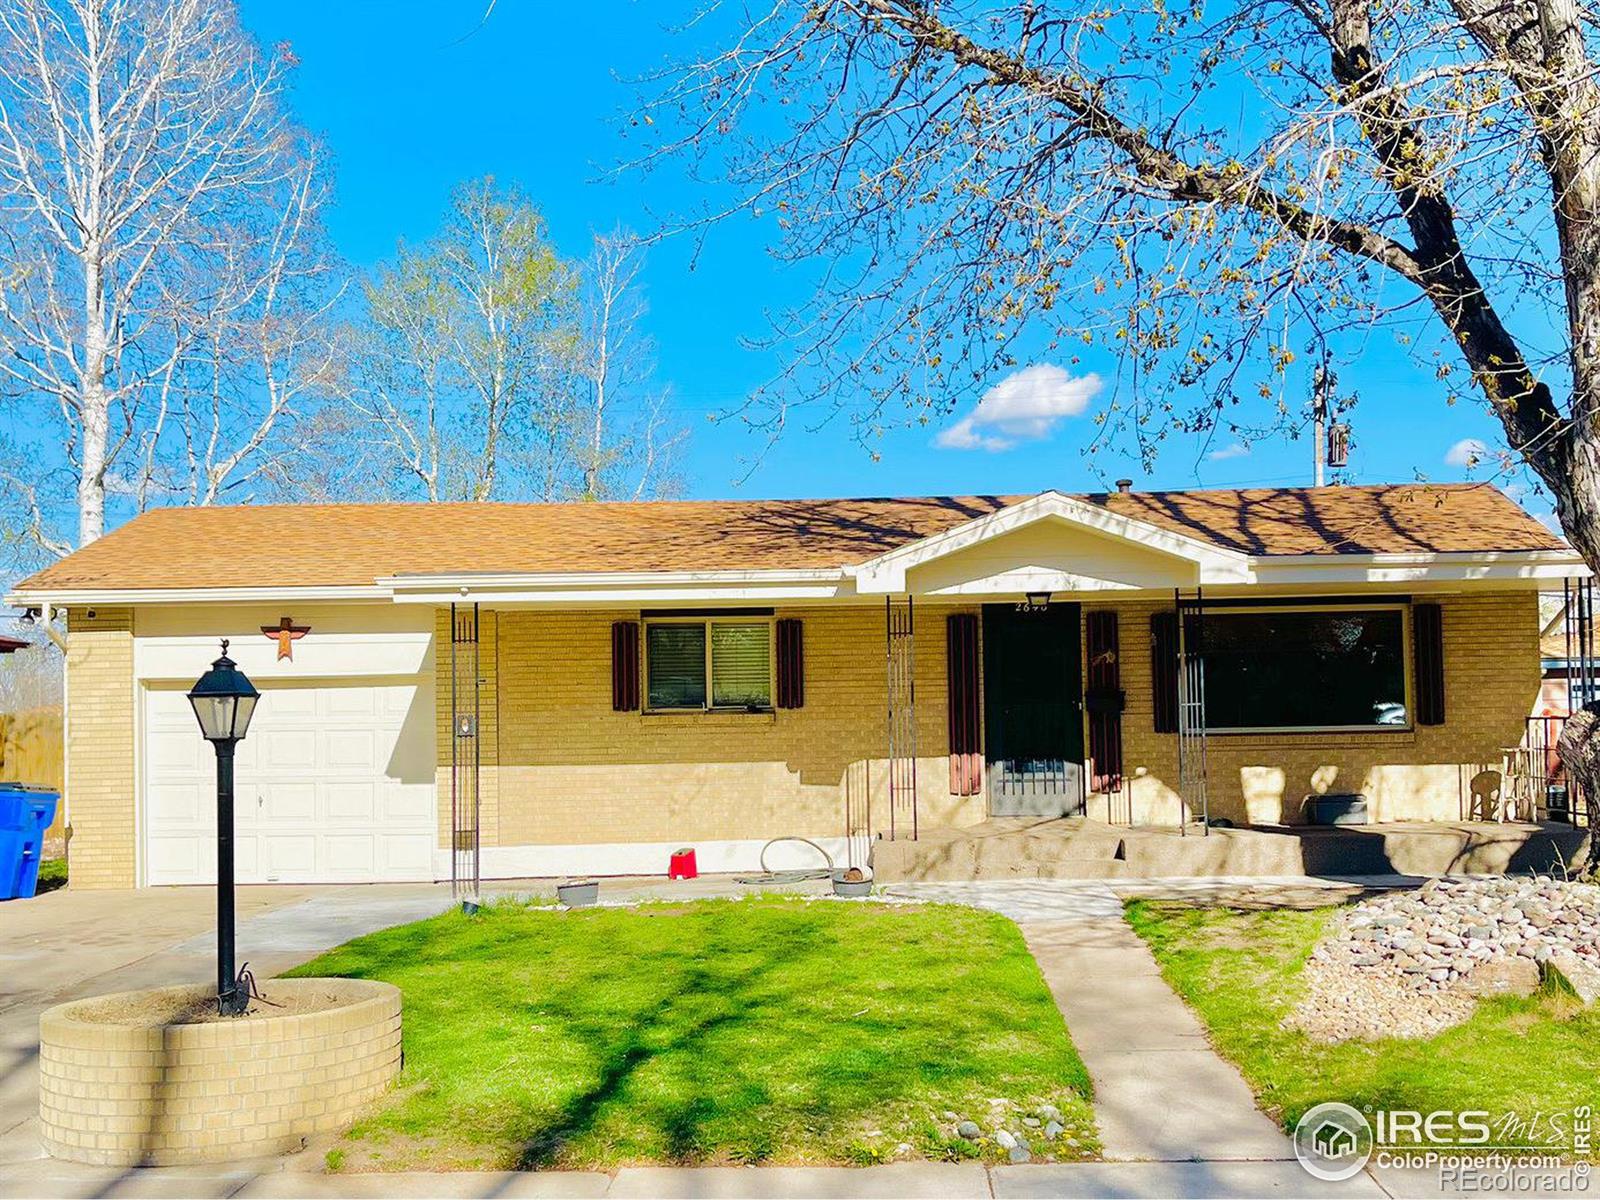 2646  12th Ave Ct, greeley MLS: 4567891007552 Beds: 4 Baths: 2 Price: $400,000